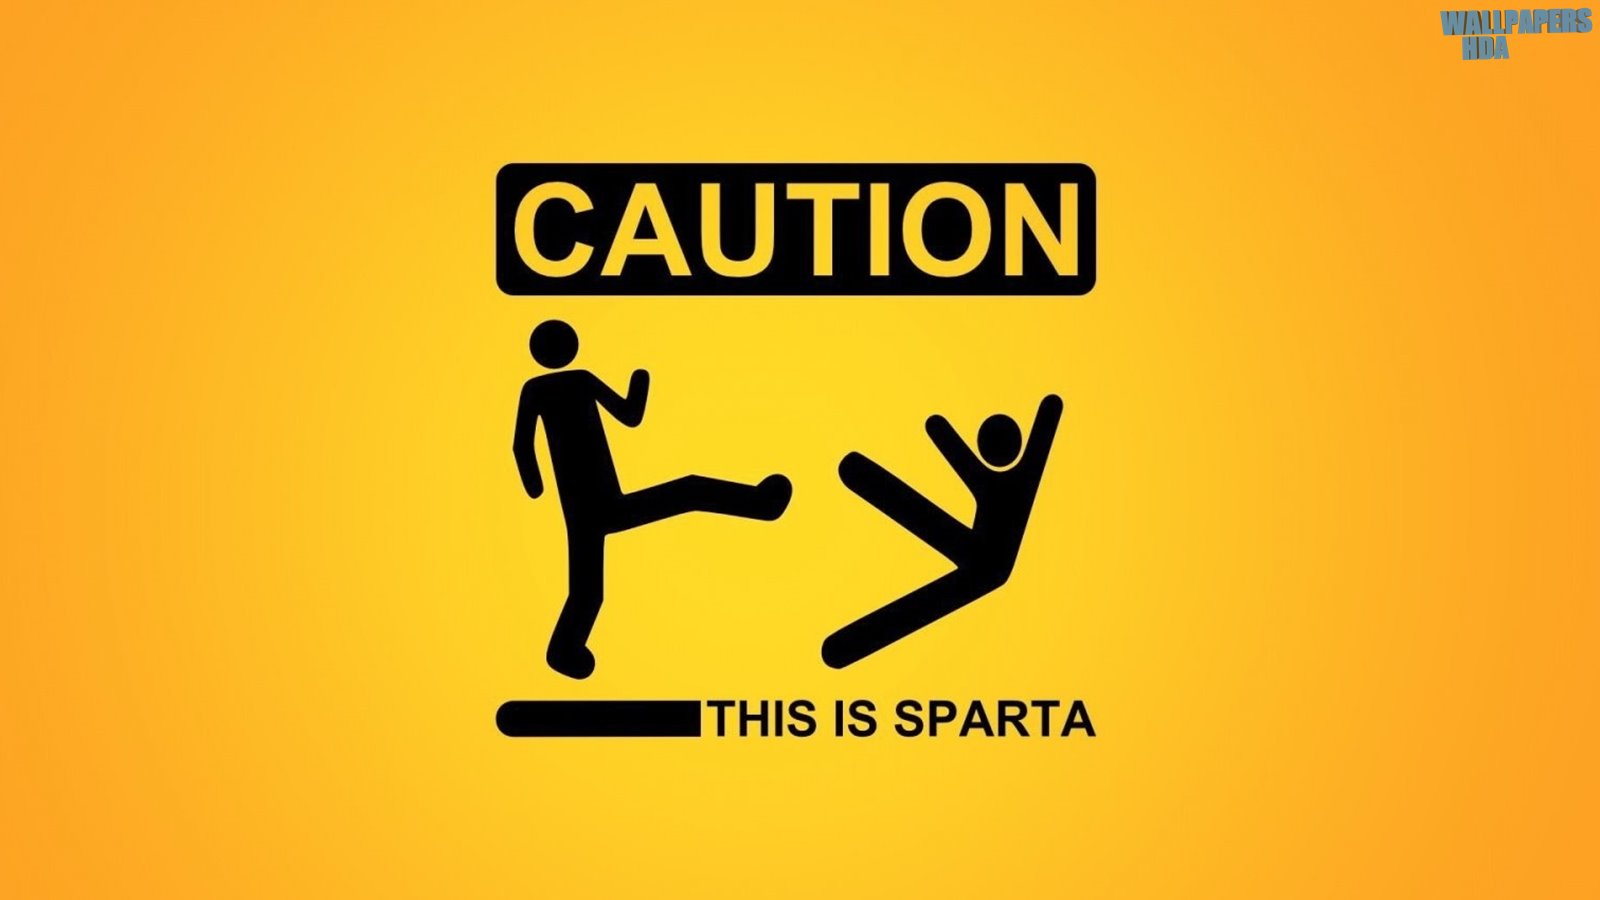 This is sparta wallpaper 1600x900